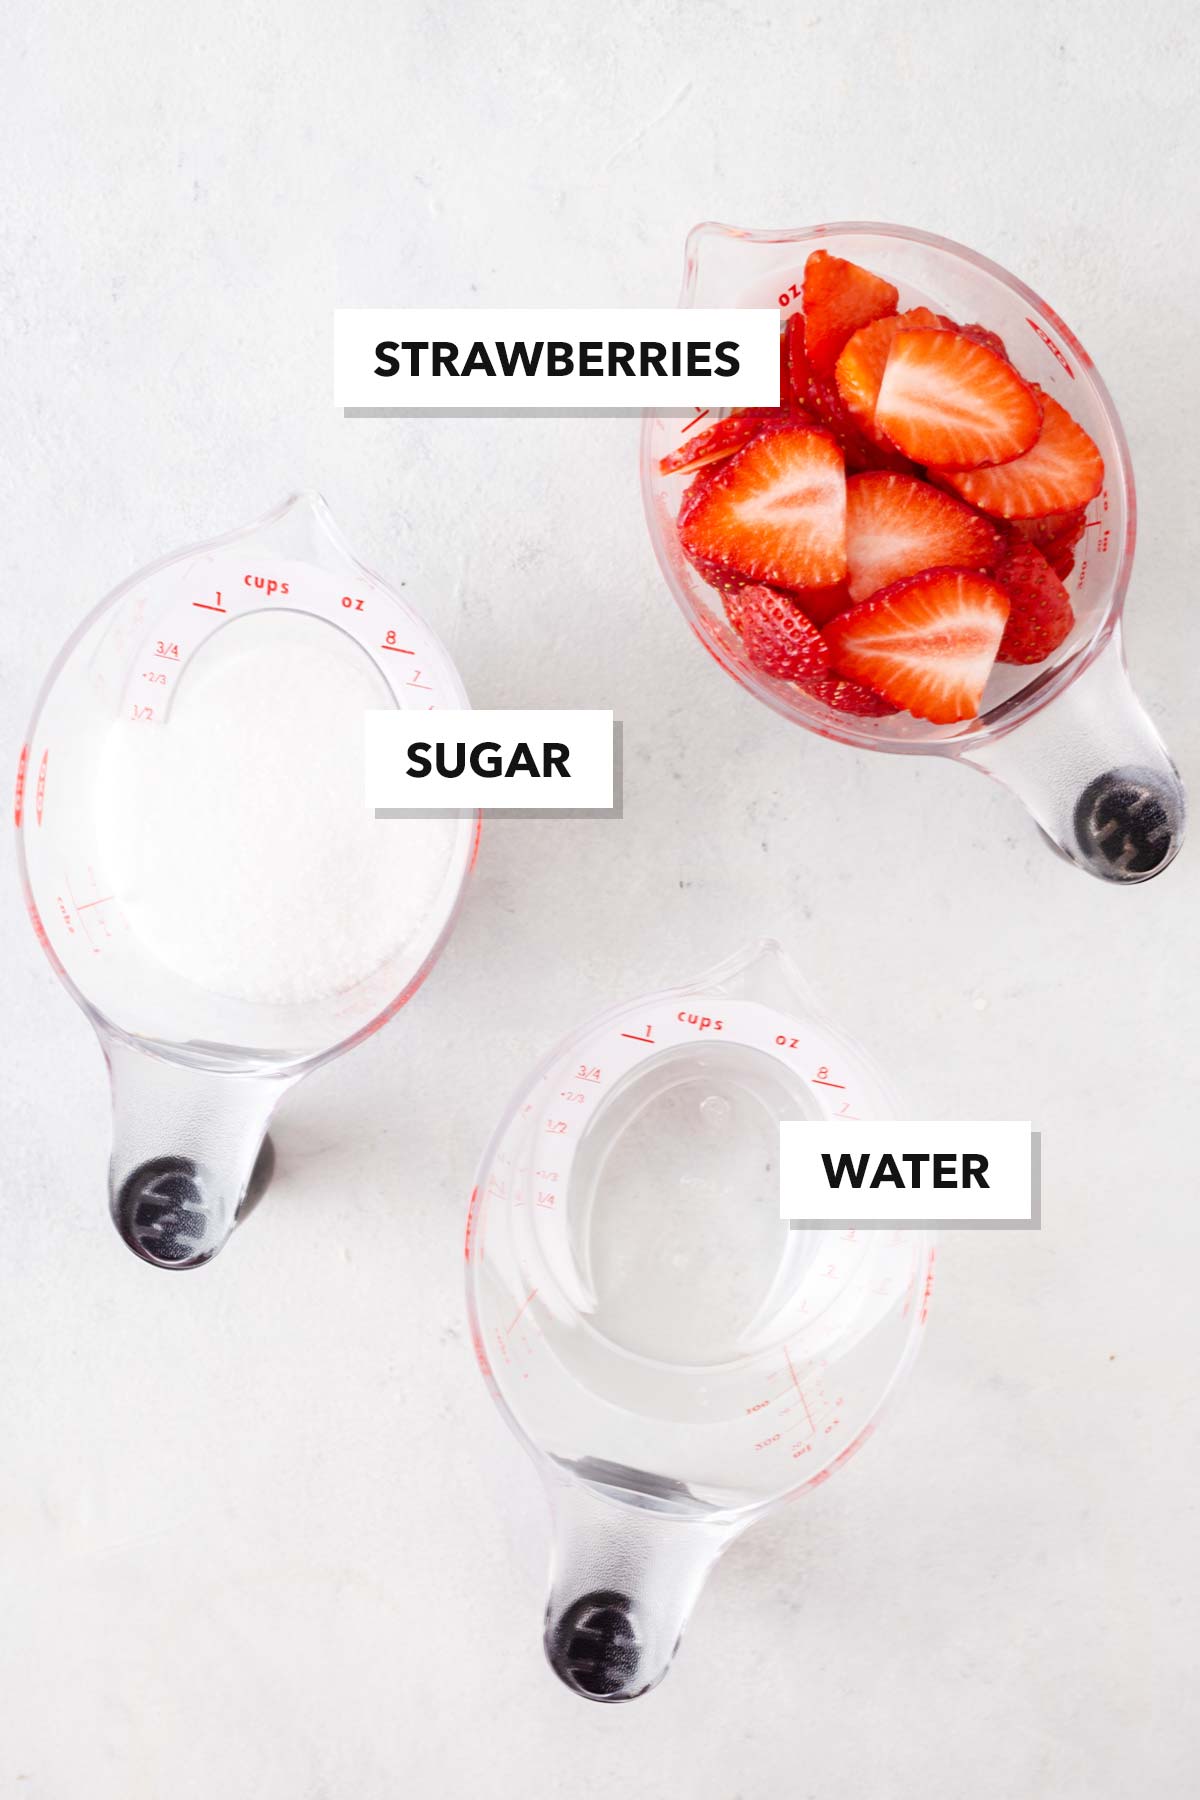 Ingredients to make strawberry syrup.